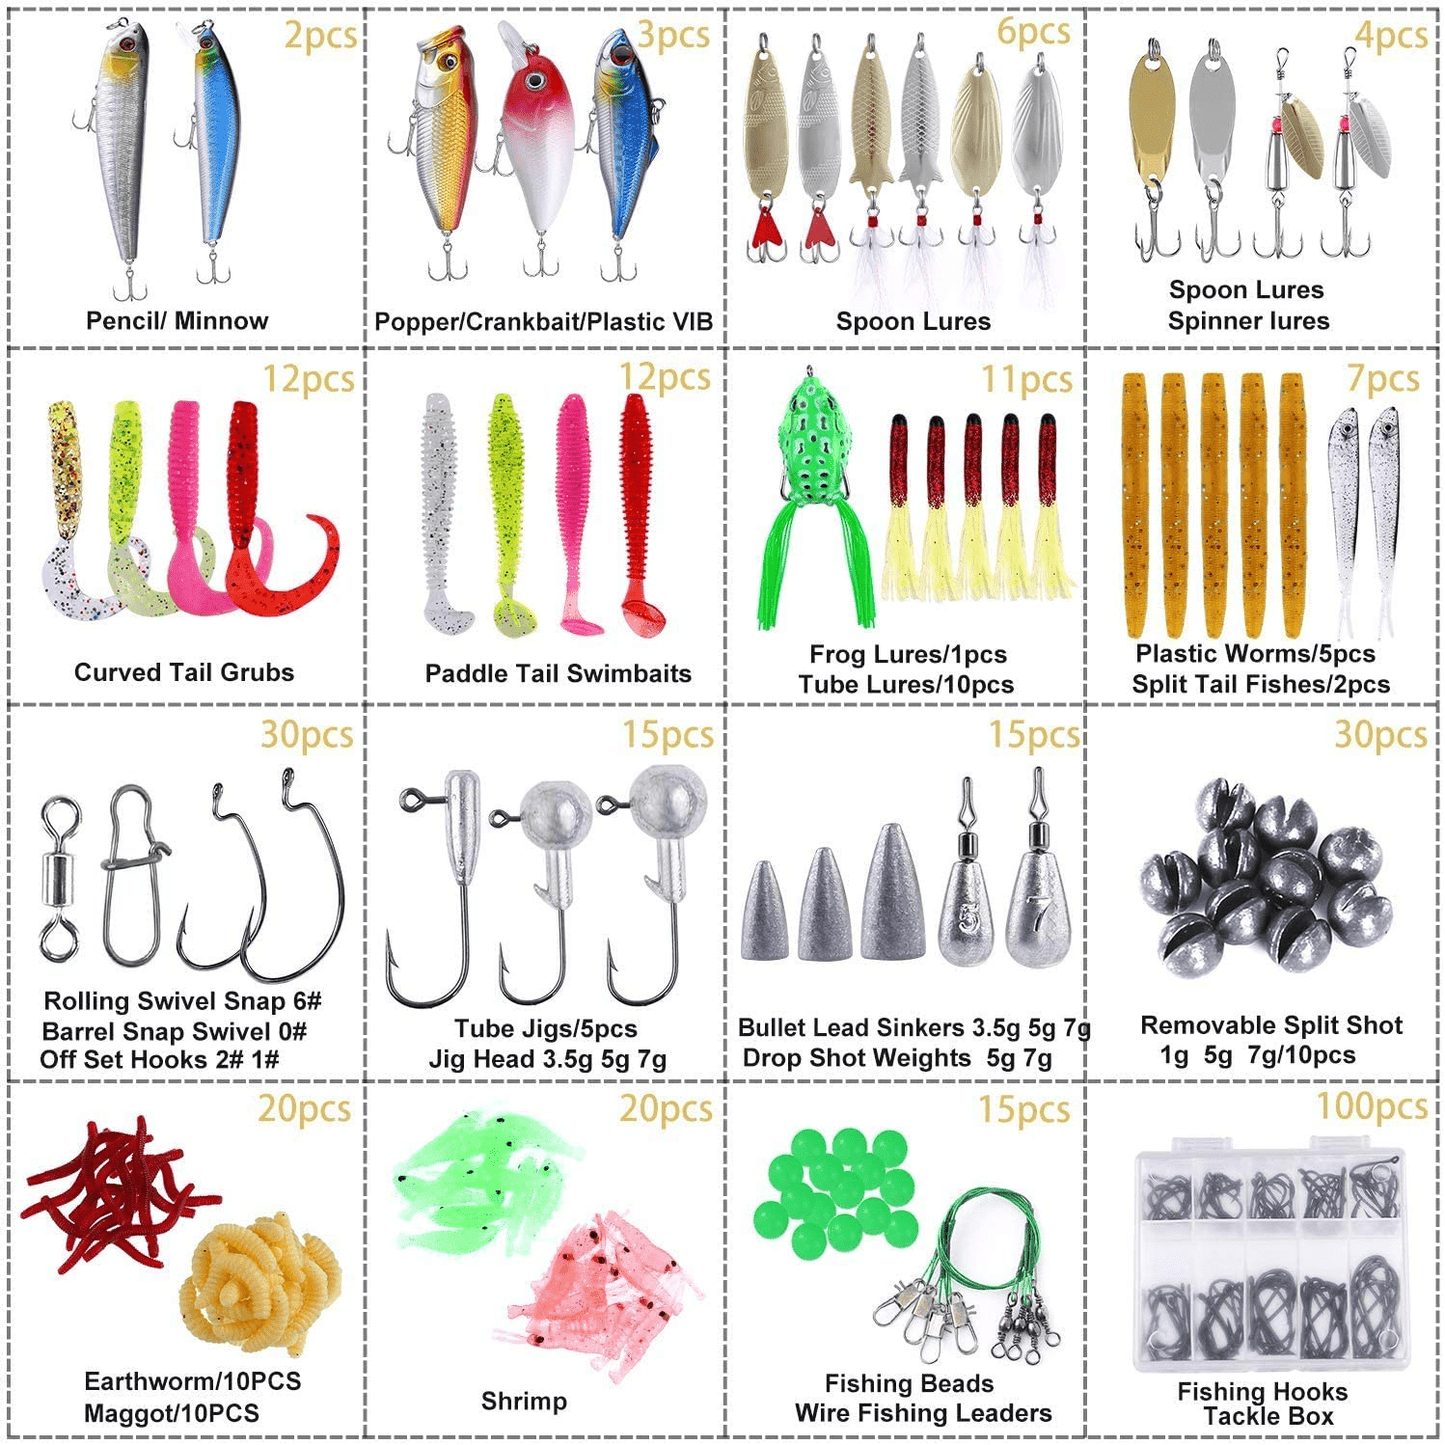 PLUSINNO Fishing Lures Baits Tackle Including Crankbaits, Spinnerbaits, Plastic Worms, Jigs, Topwater Lures , Tackle Box and More Fishing Gear Lures Kit Set, 102/67/27Pcs Fishing Lure Tackle